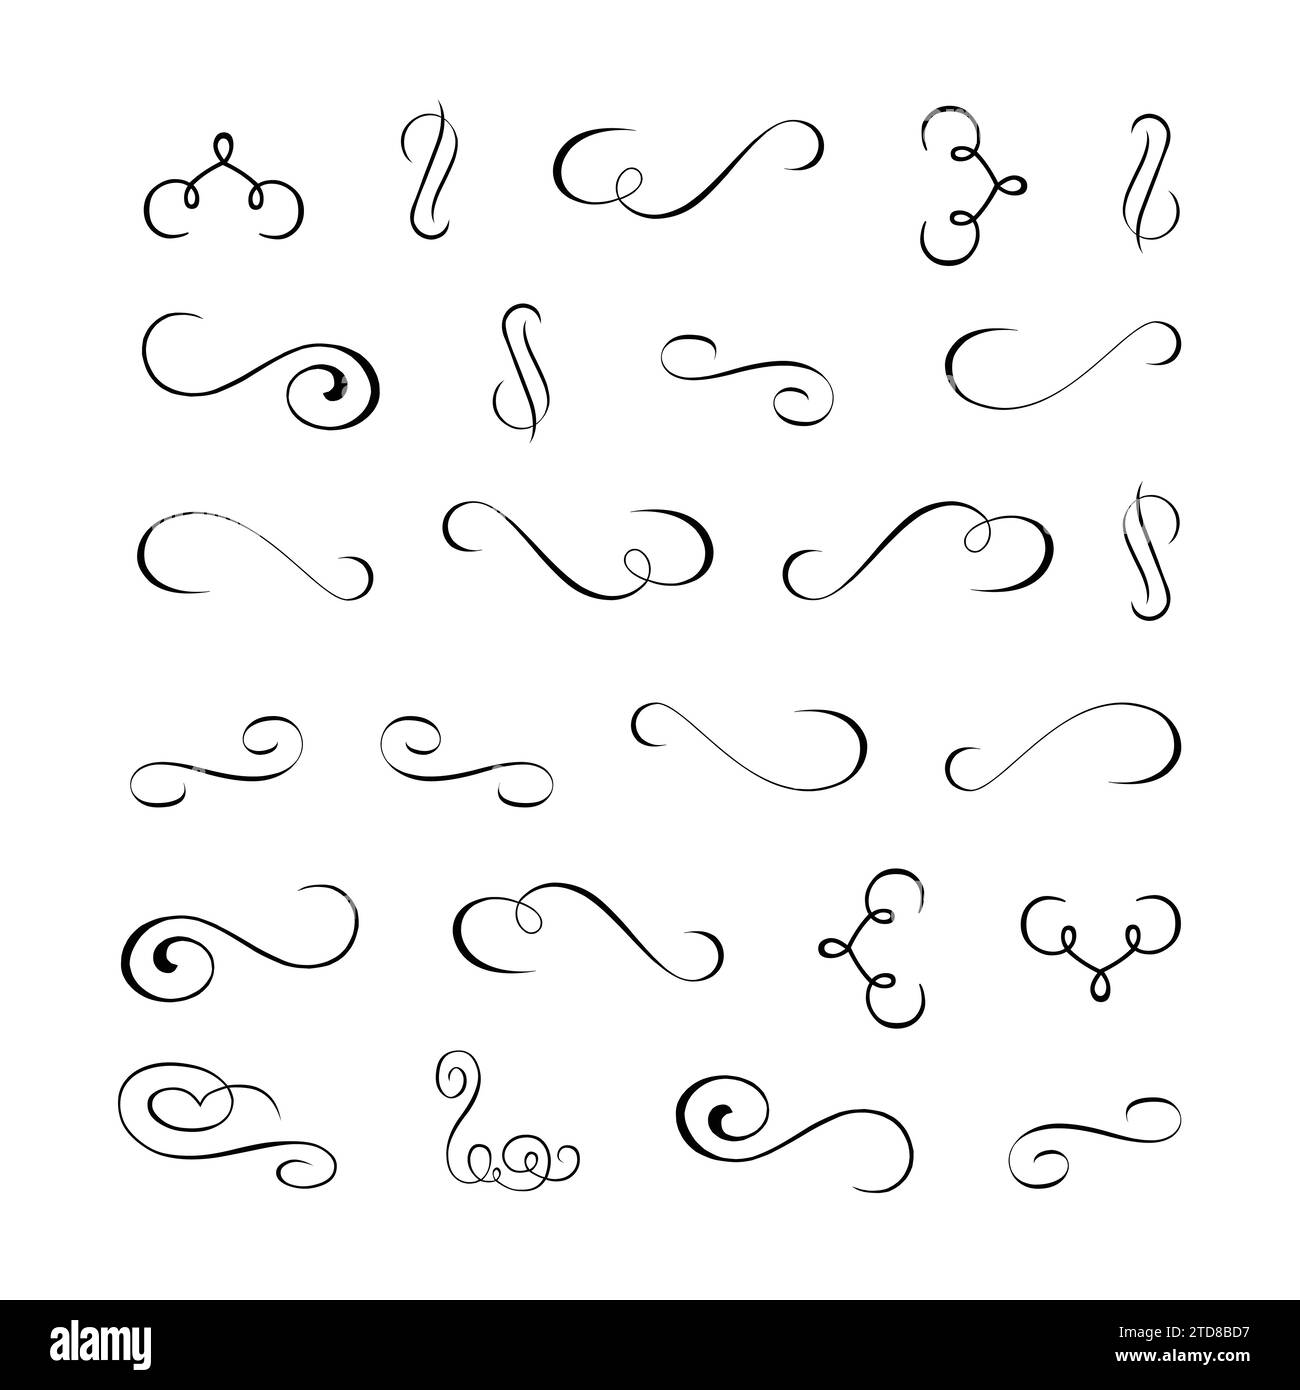 Calligraphic Vintage Vector Design Elements and Page Decorations. Set of Hand Drawn Swirls. Stock Vector